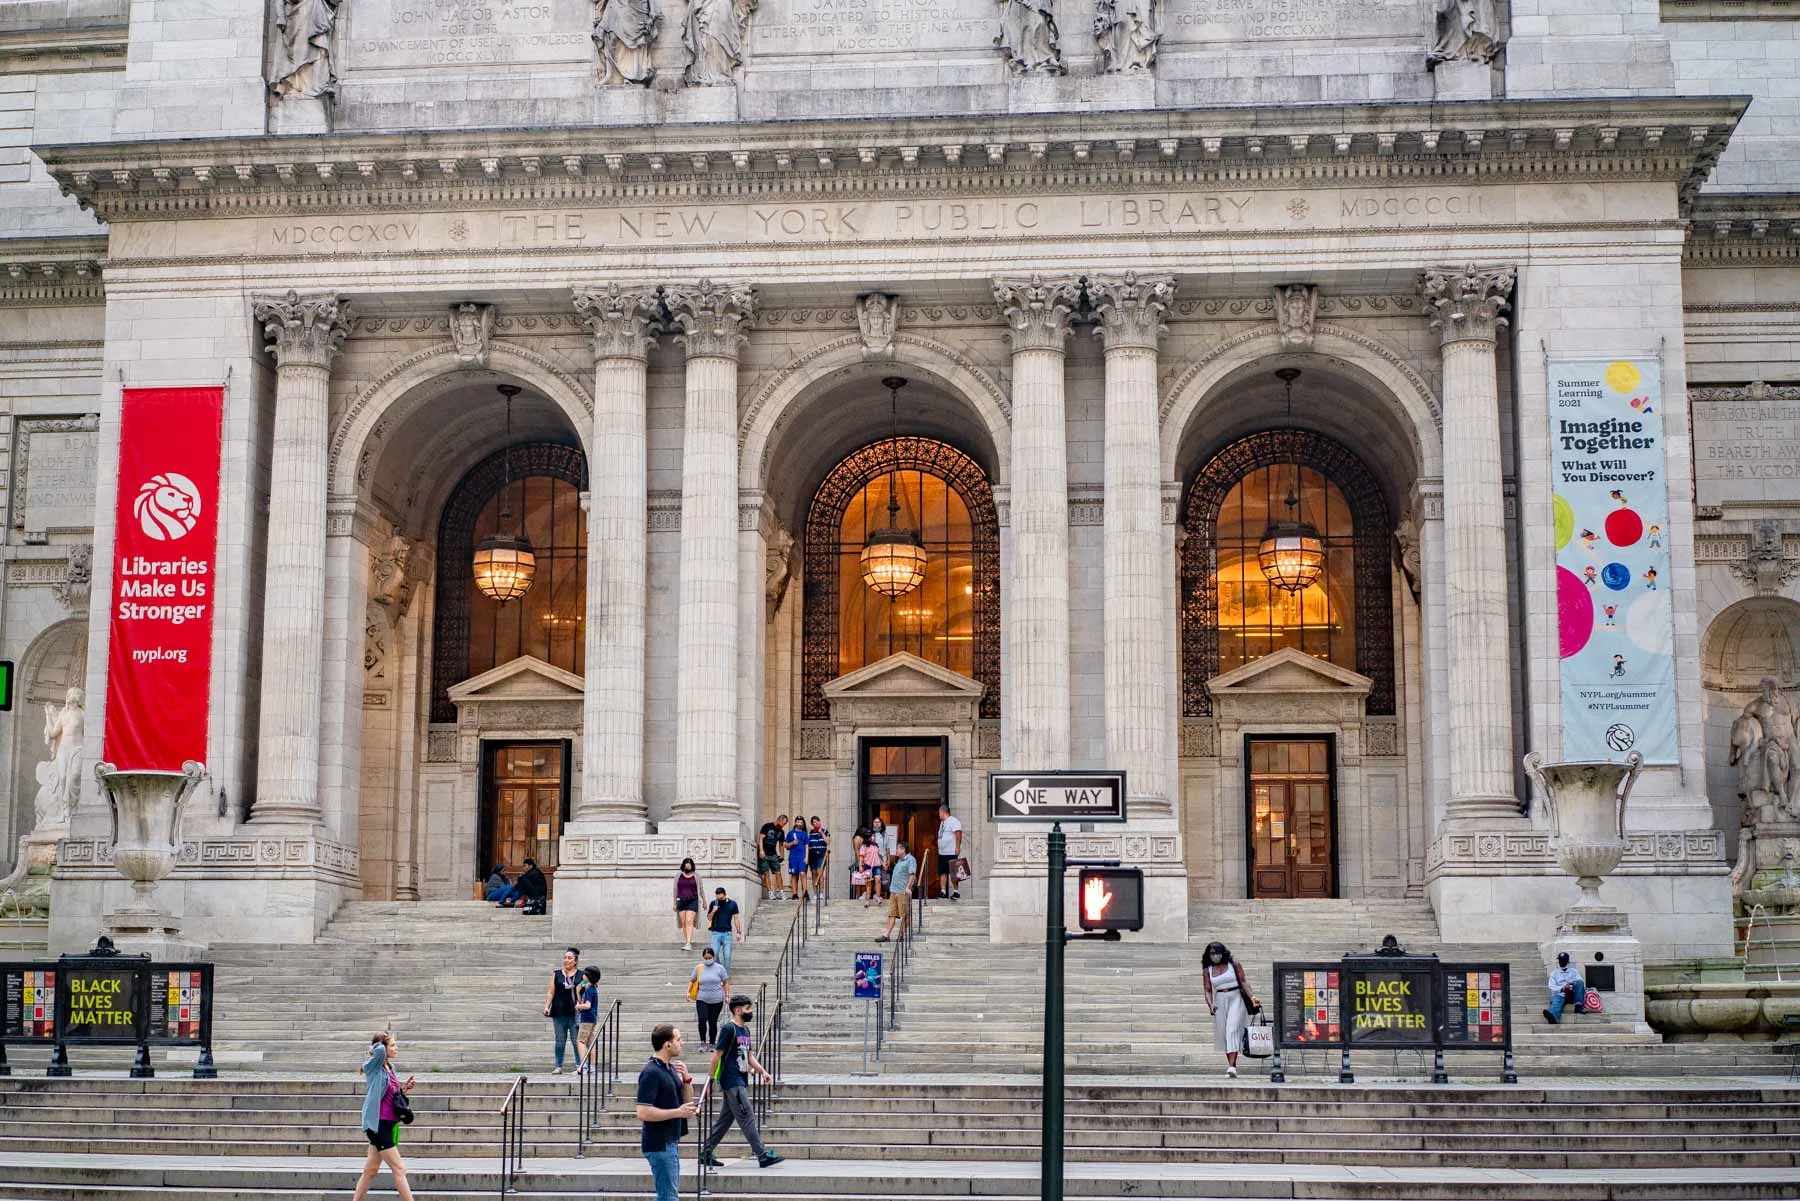 New York Public Library, winter in nyc